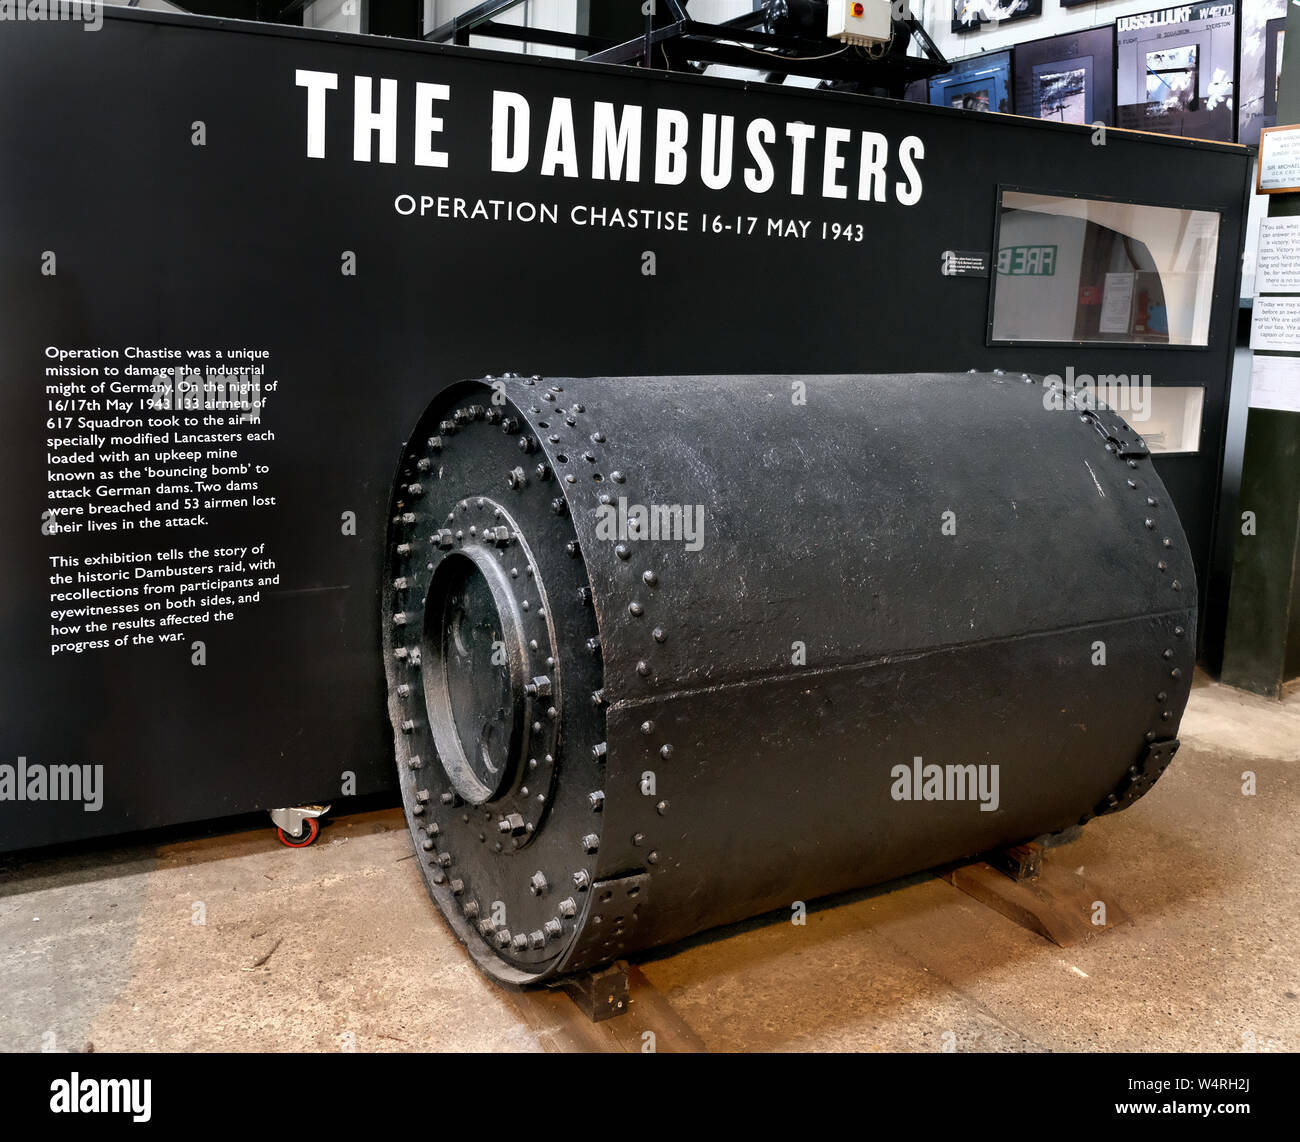 a-dummy-upkeep-bouncing-bomb-as-used-in-world-war-two-by-the-dambusters-W4RH2J.jpg